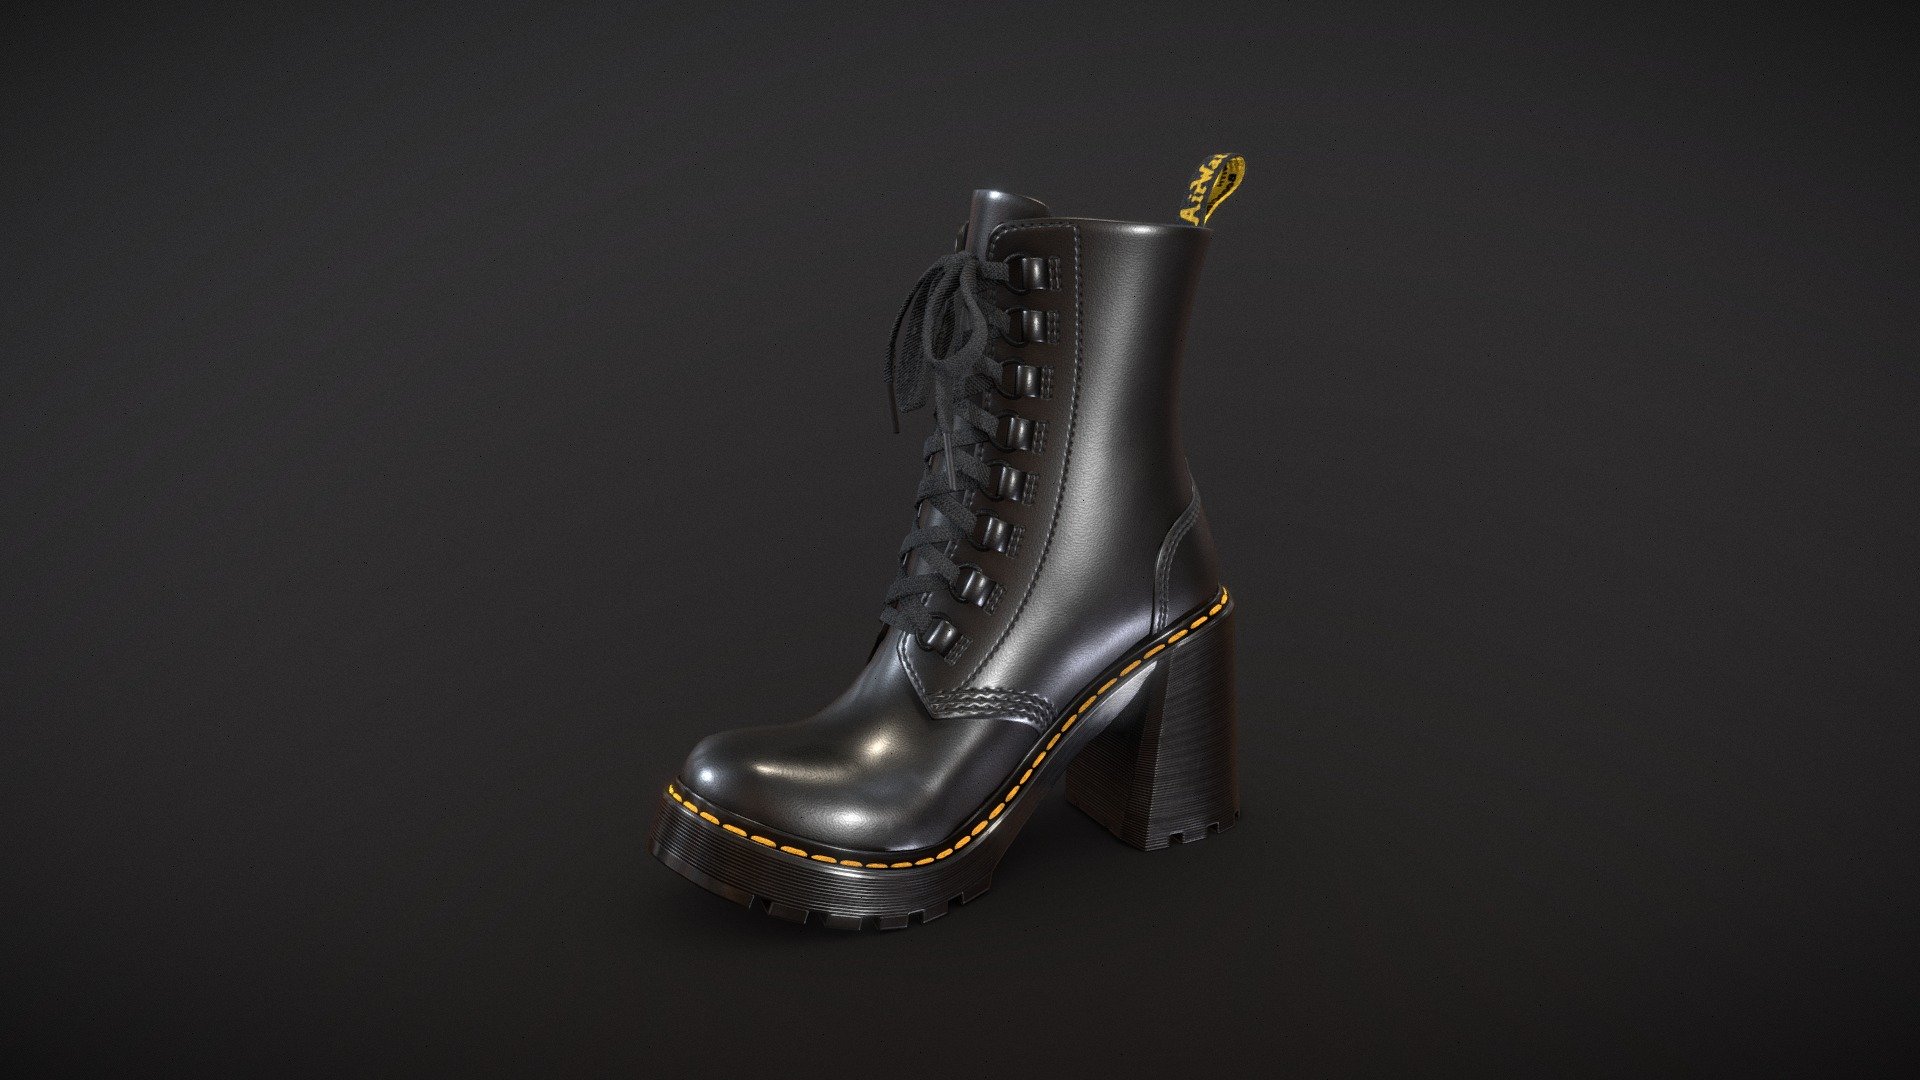 Dr. Martens Chesney

Game and production ready, polycount optimized for quality, ideal for high quality Characters and Close-Ups

Internal parts modeled and textured, ideal for customization or animation

Laces are continuous, no cuts behind the eyelets

Single UV space

PBR and UE4 4k Textures

Low Poly has 8.4k quads

FBX, OBJ, ZTL

Includes 3 Color Variations:

Black / White / Beige - Dr. Martens Chesney - Buy Royalty Free 3D model by Feds452 3d model